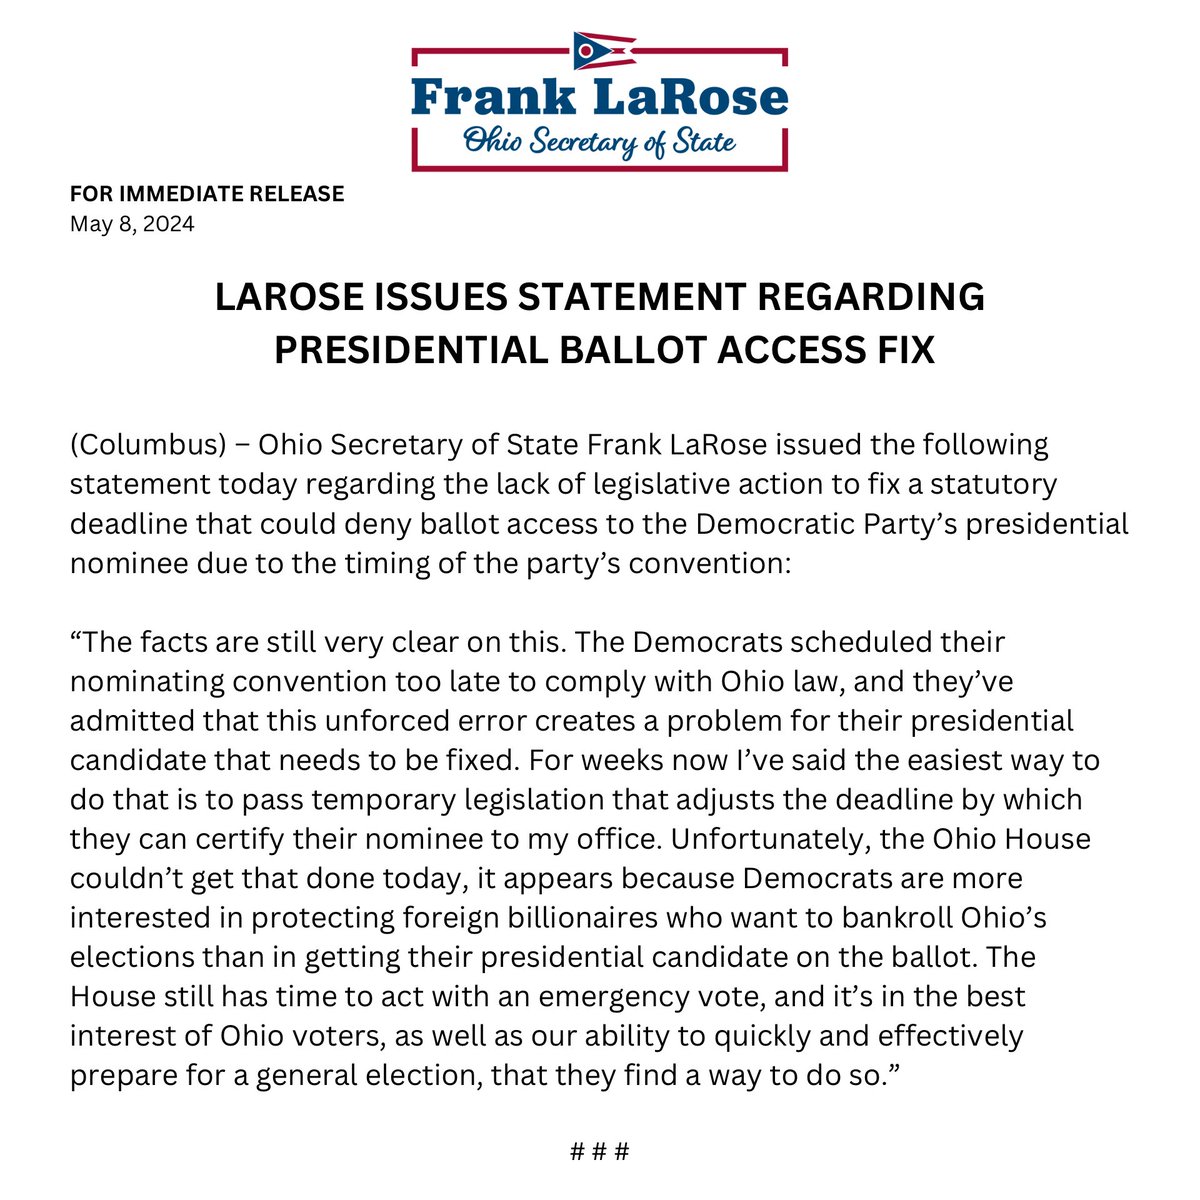 My statement on today’s unfortunate lack of legislative action.